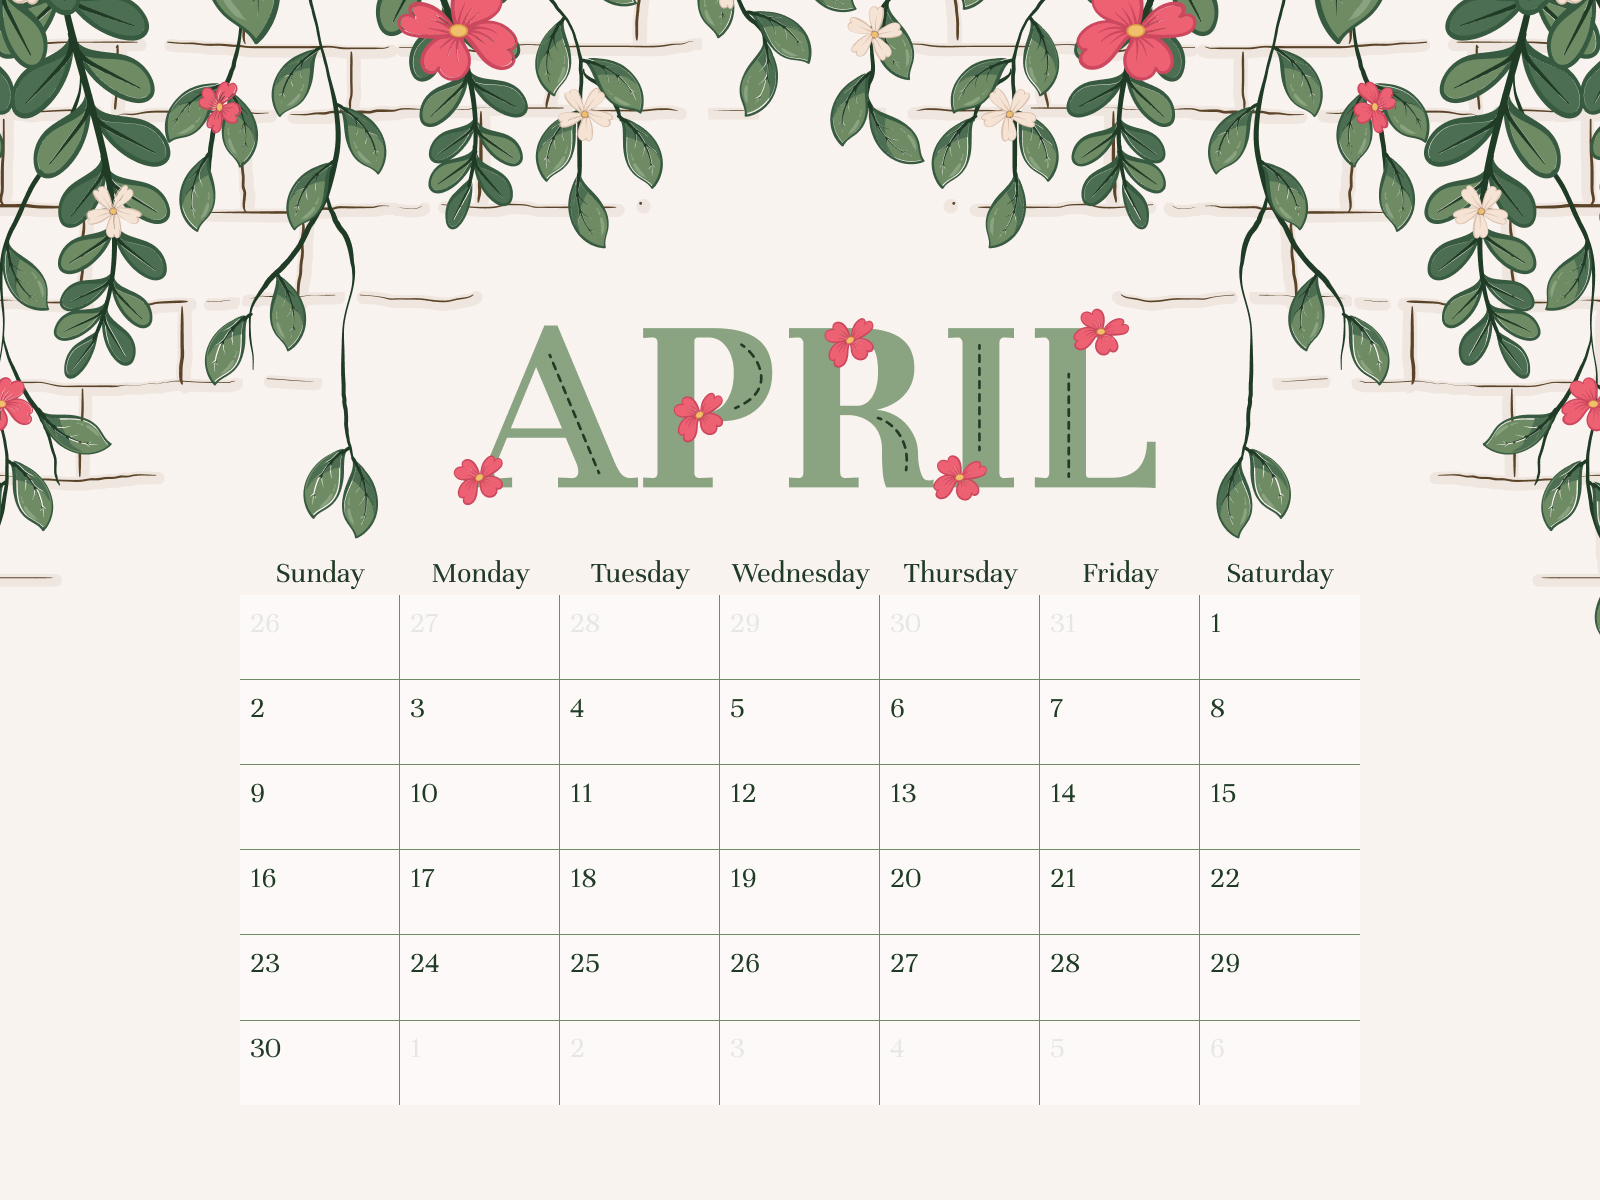 Calendar for the month of april with flowers.